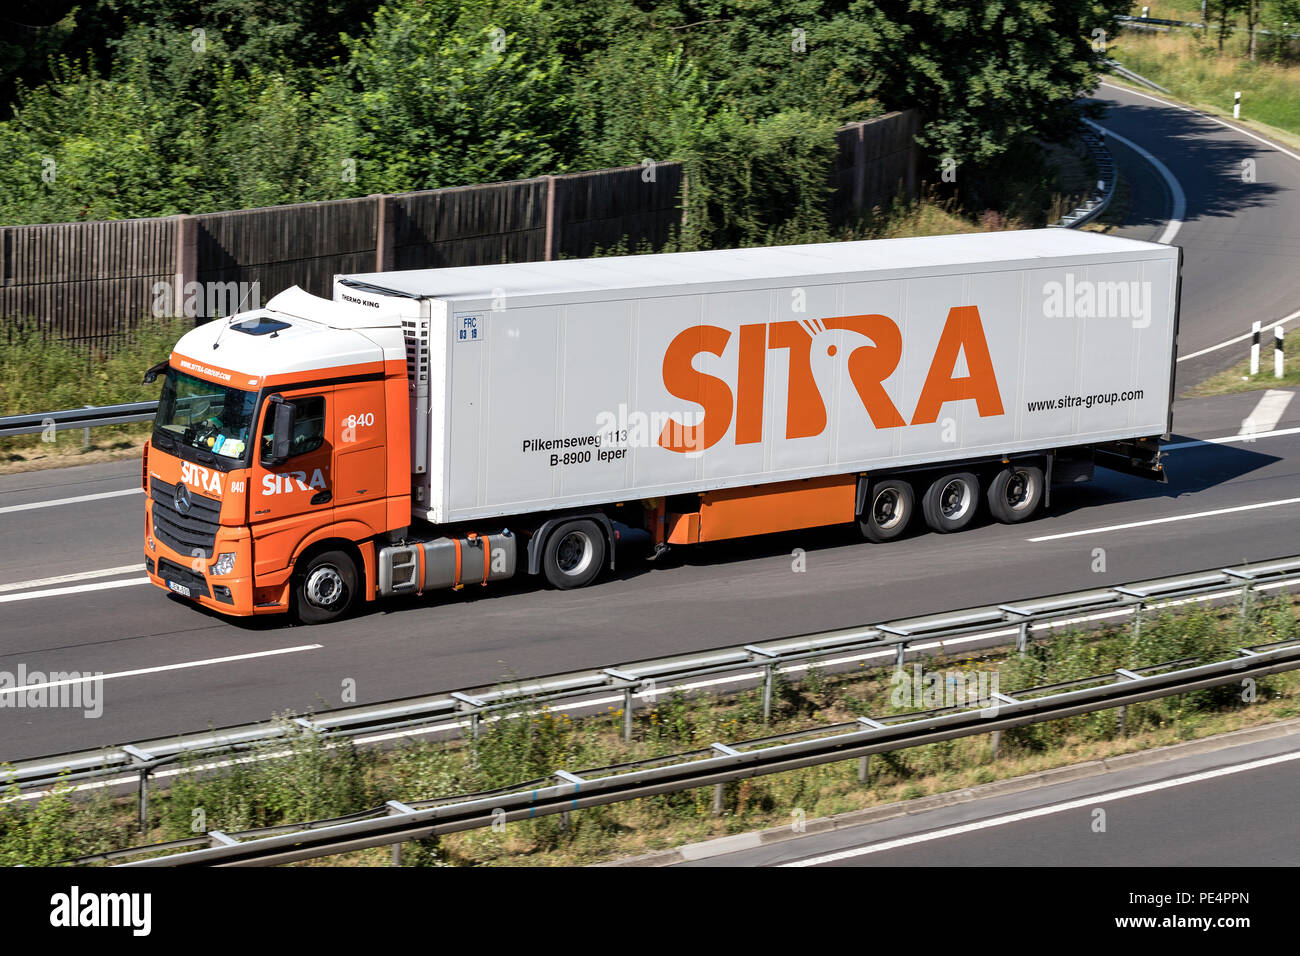 Sitra truck on motorway. Sitra Group is a Belgian transport company with excessive specialization in the transportation of food products. Stock Photo